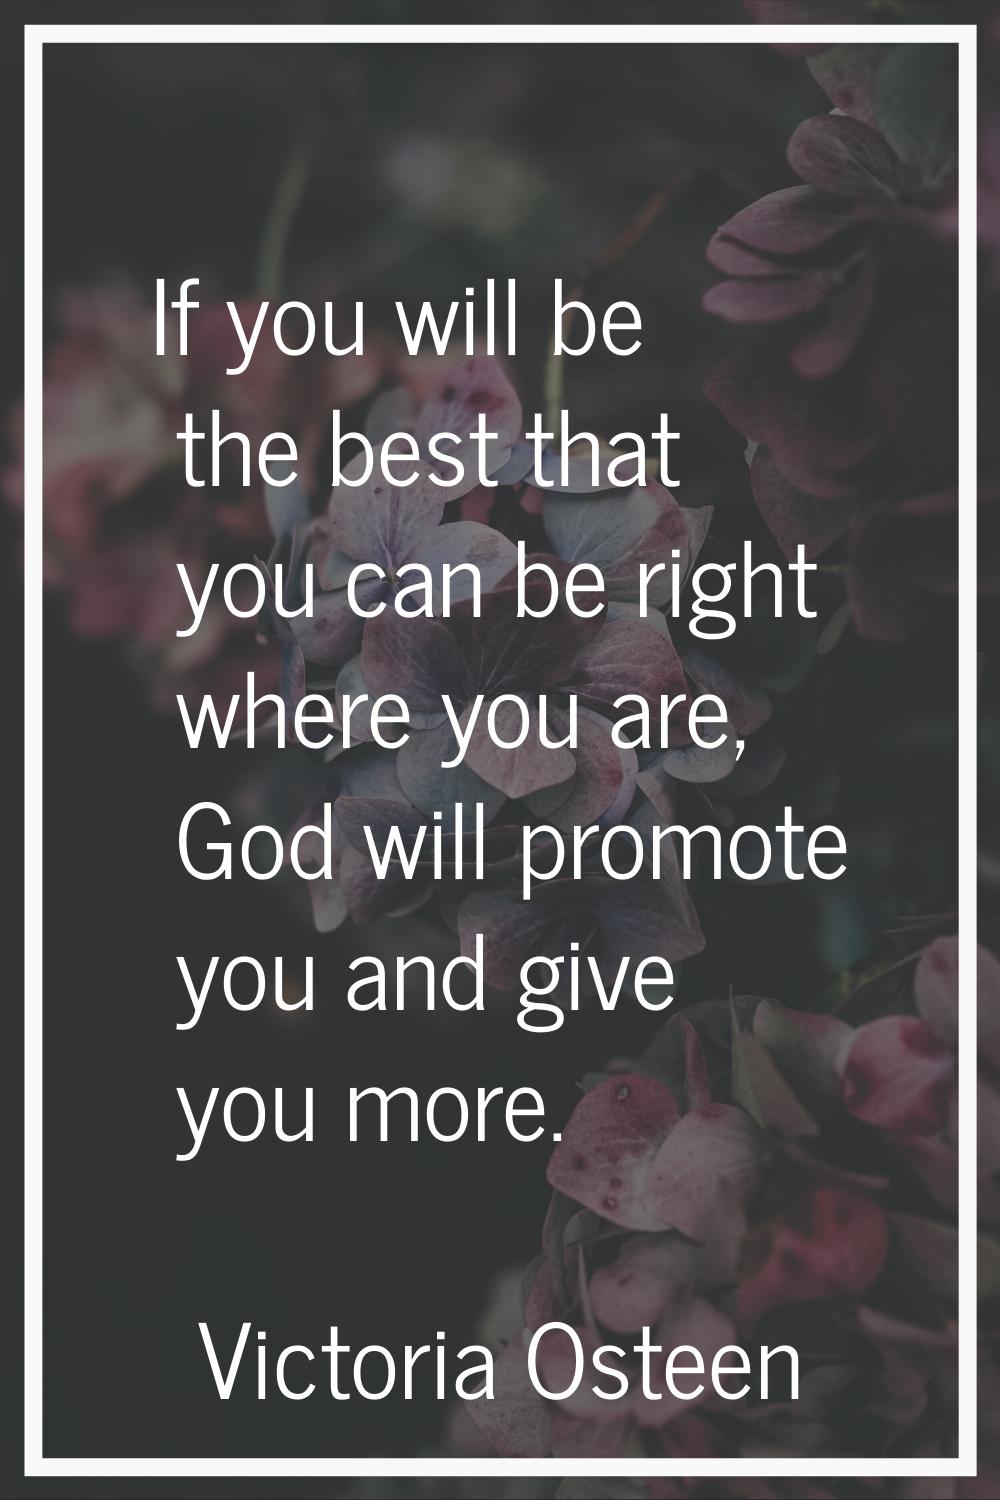 If you will be the best that you can be right where you are, God will promote you and give you more